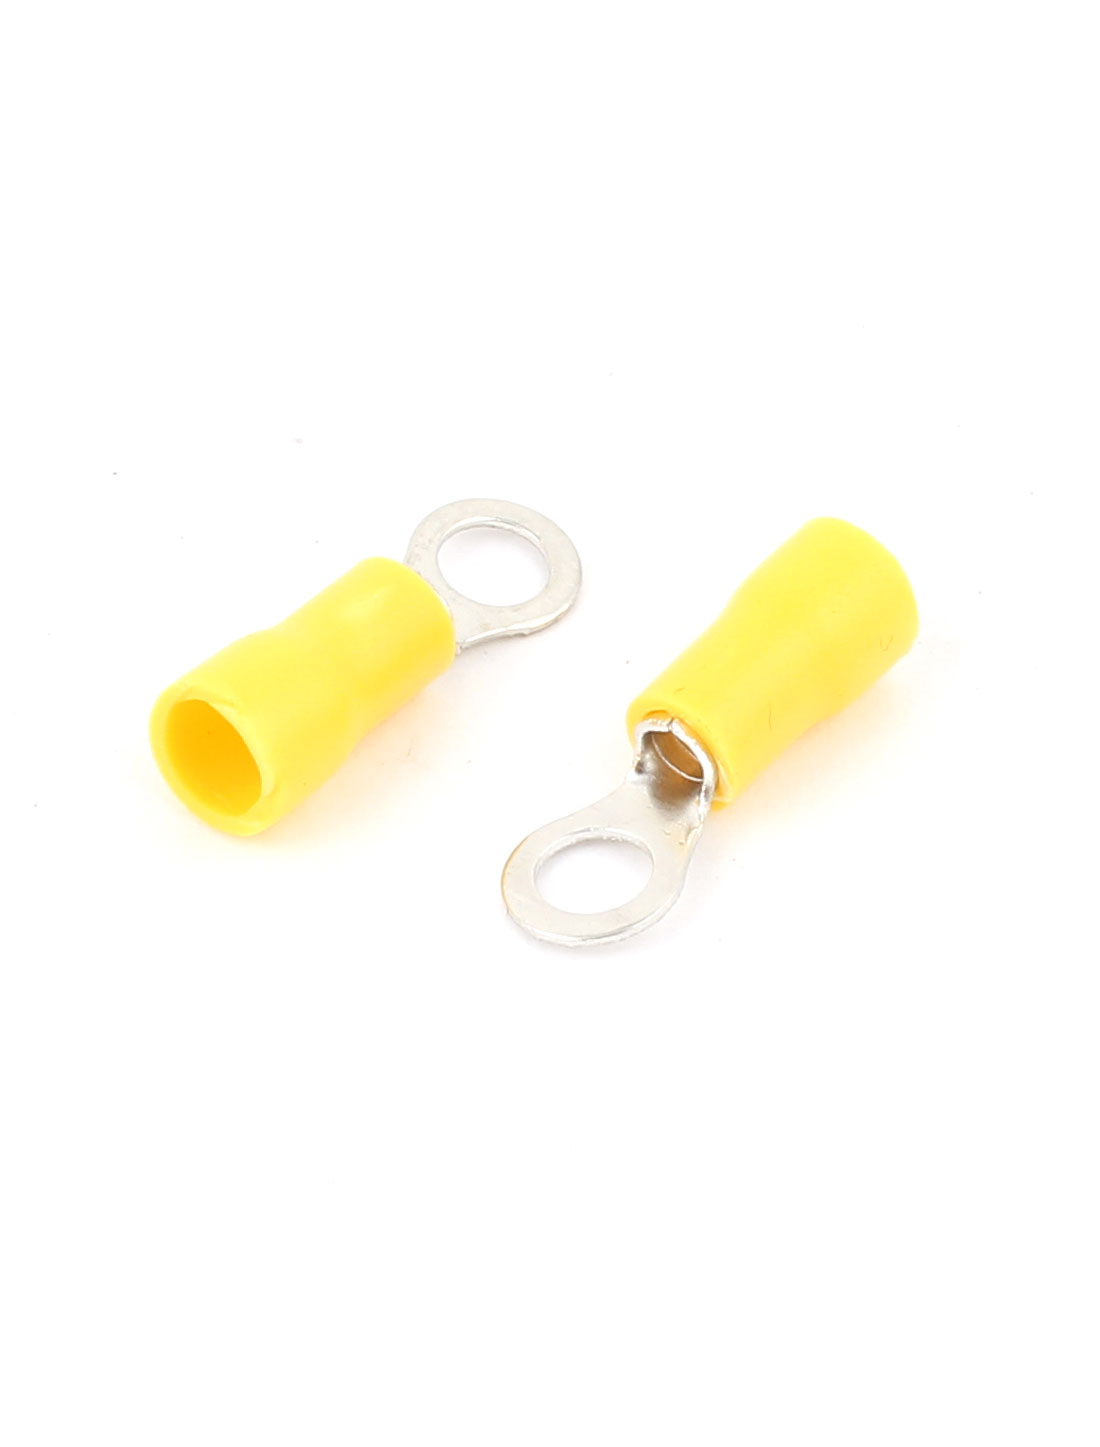 Unique Bargains 40 Pcs Insulated Ring Crimp Electric Cable Terminals Connector AWG 16-14 Yellow